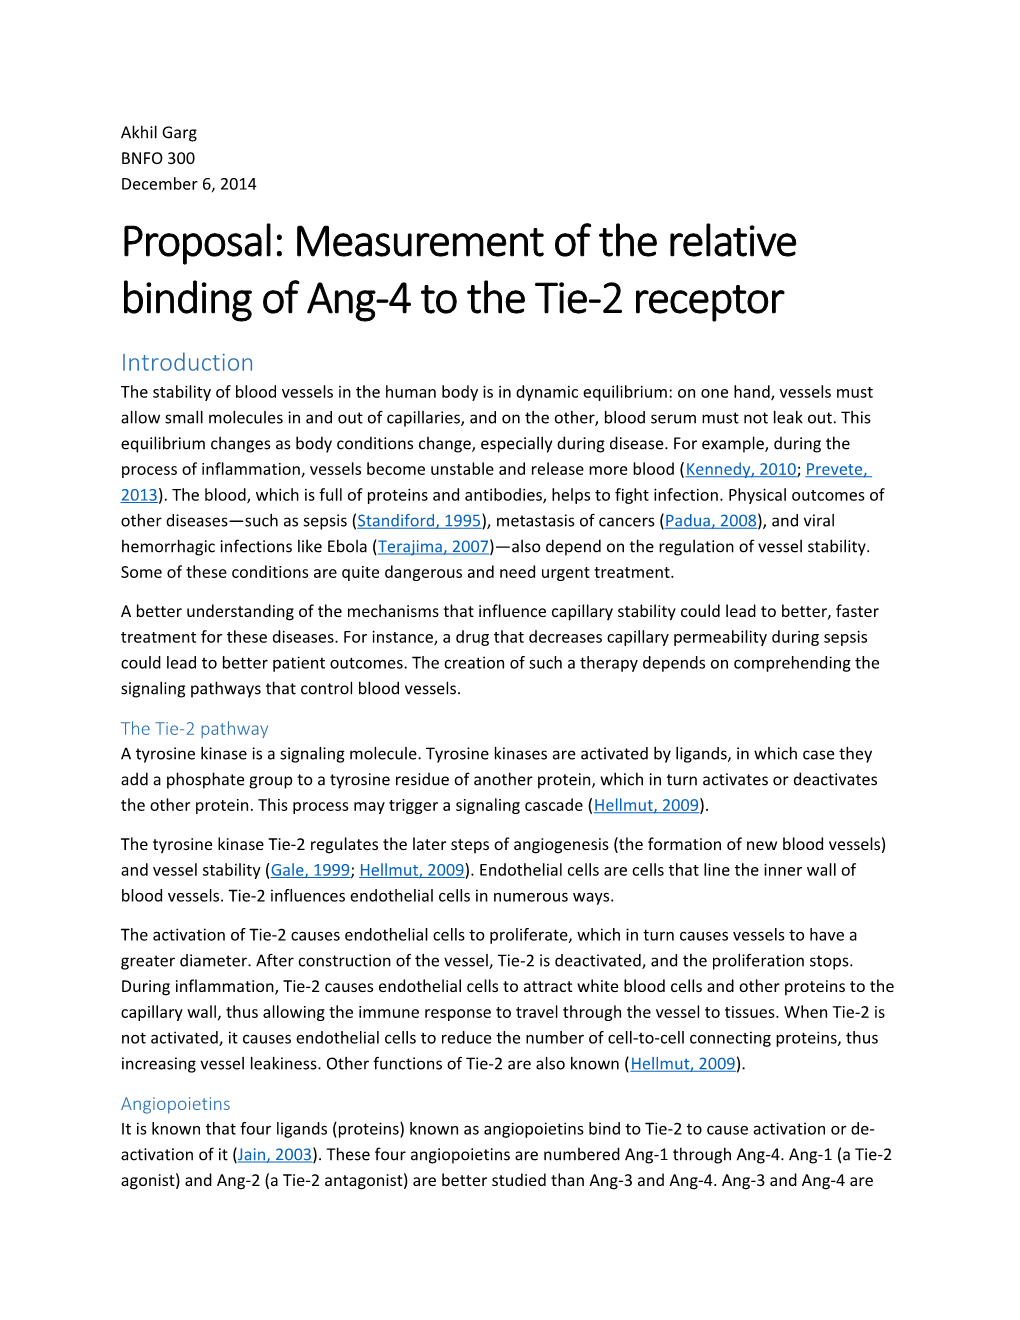 Proposal: Measurement of the Relative Binding of Ang-4 to the Tie-2 Receptor